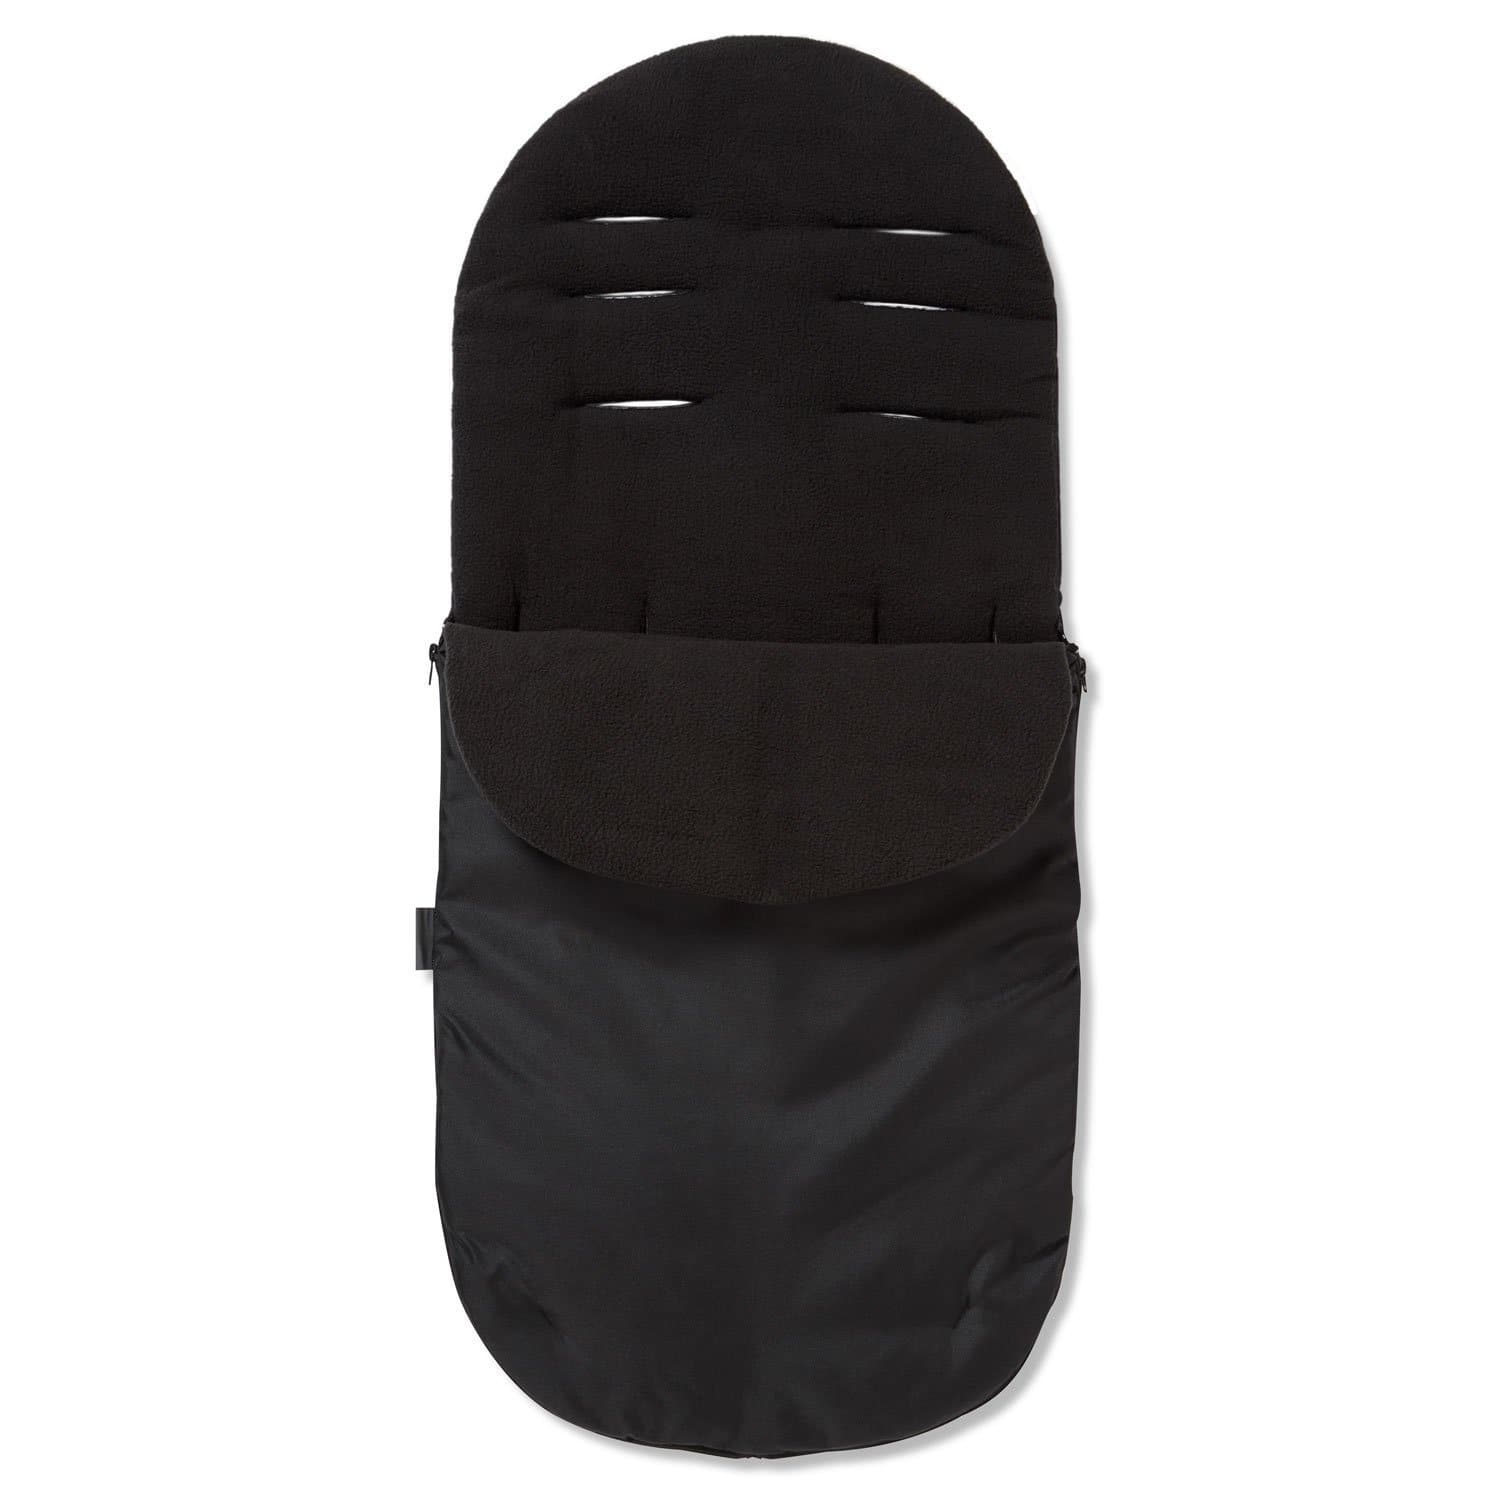 Footmuff / Cosy Toes Compatible with Joie - Black / Fits All Models | For Your Little One